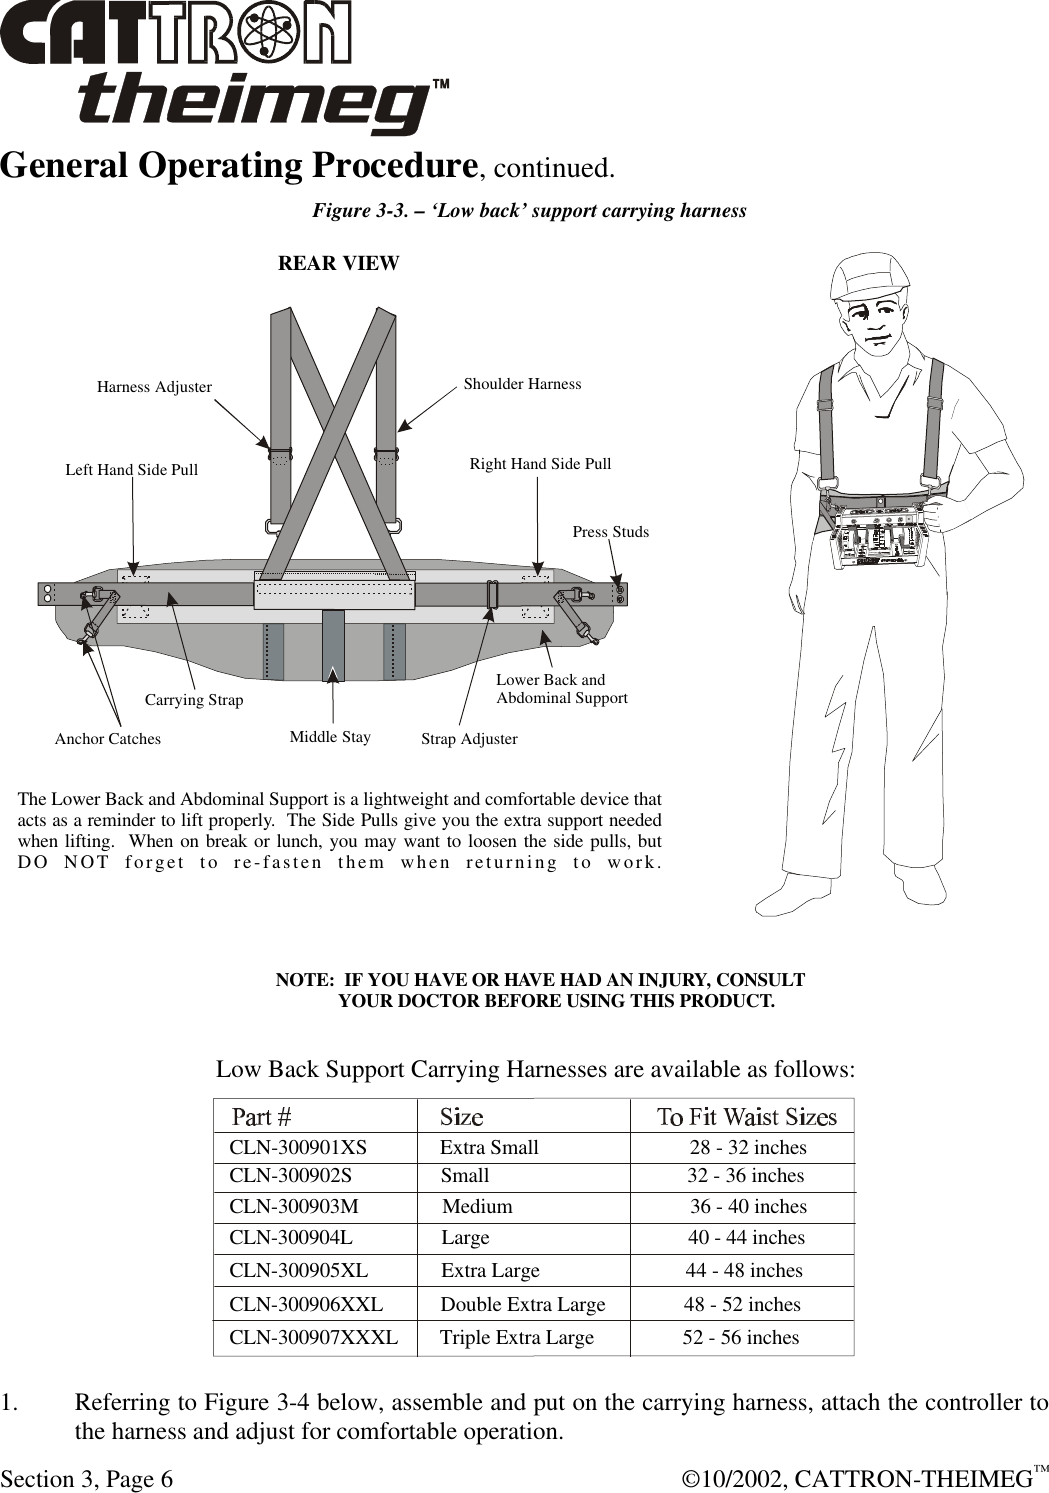  Section 3, Page 6  ©10/2002, CATTRON-THEIMEG™ General Operating Procedure, continued.    Figure 3-3. – ‘Low back’ support carrying harness  1. Referring to Figure 3-4 below, assemble and put on the carrying harness, attach the controller to the harness and adjust for comfortable operation.  Middle StayStrap AdjusterCarrying StrapAnchor CatchesPress StudsShoulder HarnessREAR VIEWHarness AdjusterRight Hand Side PullLeft Hand Side PullLower Back andAbdominal SupportLow Back Support Carrying Harnesses are available as follows:The Lower Back and Abdominal Support is a lightweight and comfortable device thatacts as a reminder to lift properly.  The Side Pulls give you the extra support neededwhen lifting.  When on break or lunch, you may want to loosen the side pulls, butDO NOT forget to re-fasten them when returning to work.CLN-300902S                 Small                                      32 - 36 inchesCLN-300903M                Medium                                  36 - 40 inchesCLN-300904L                 Large                                      40 - 44 inchesCLN-300905XL              Extra Large                            44 - 48 inchesCLN-300906XXL           Double Extra Large               48 - 52 inchesCLN-300907XXXL        Triple Extra Large                 52 - 56 inchesCLN-300901XS              Extra Small                             28 - 32 inchesNOTE:  IF YOU HAVE OR HAVE HAD AN INJURY, CONSULT        YOUR DOCTOR BEFORE USING THIS PRODUCT.